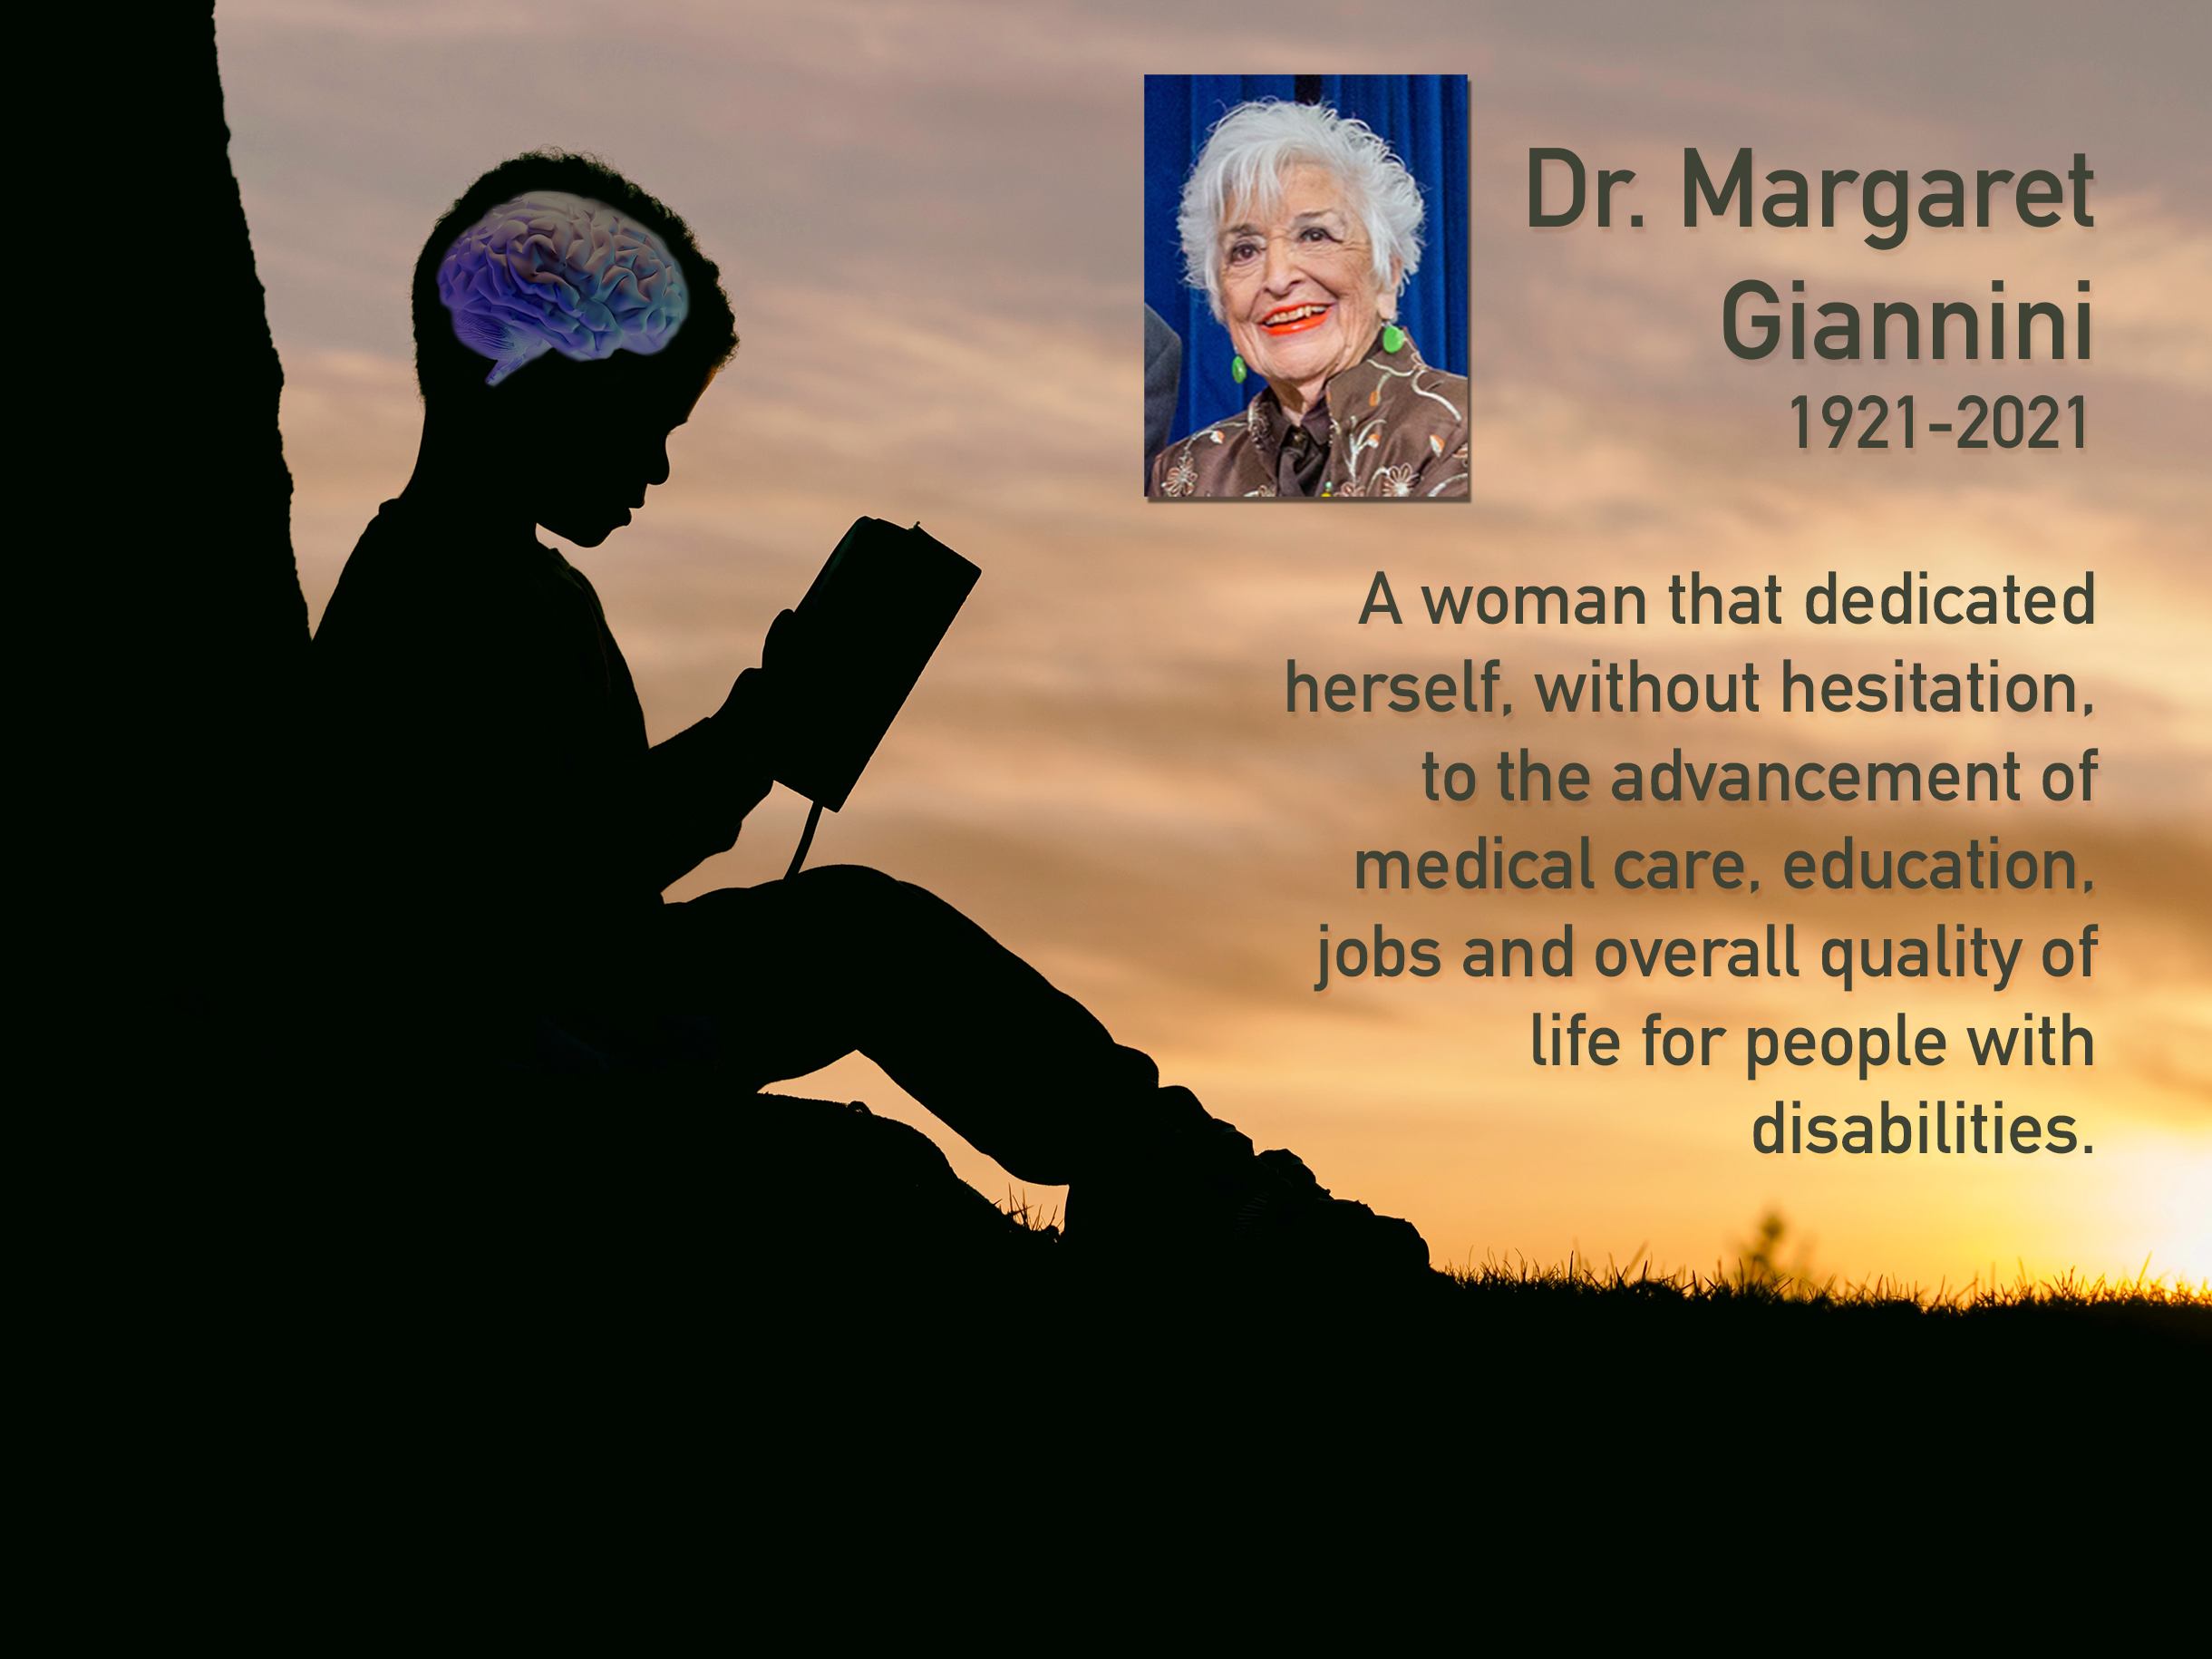 an image of Dr. Margaret Giannini with a quote about her dedication to people with disabilities.